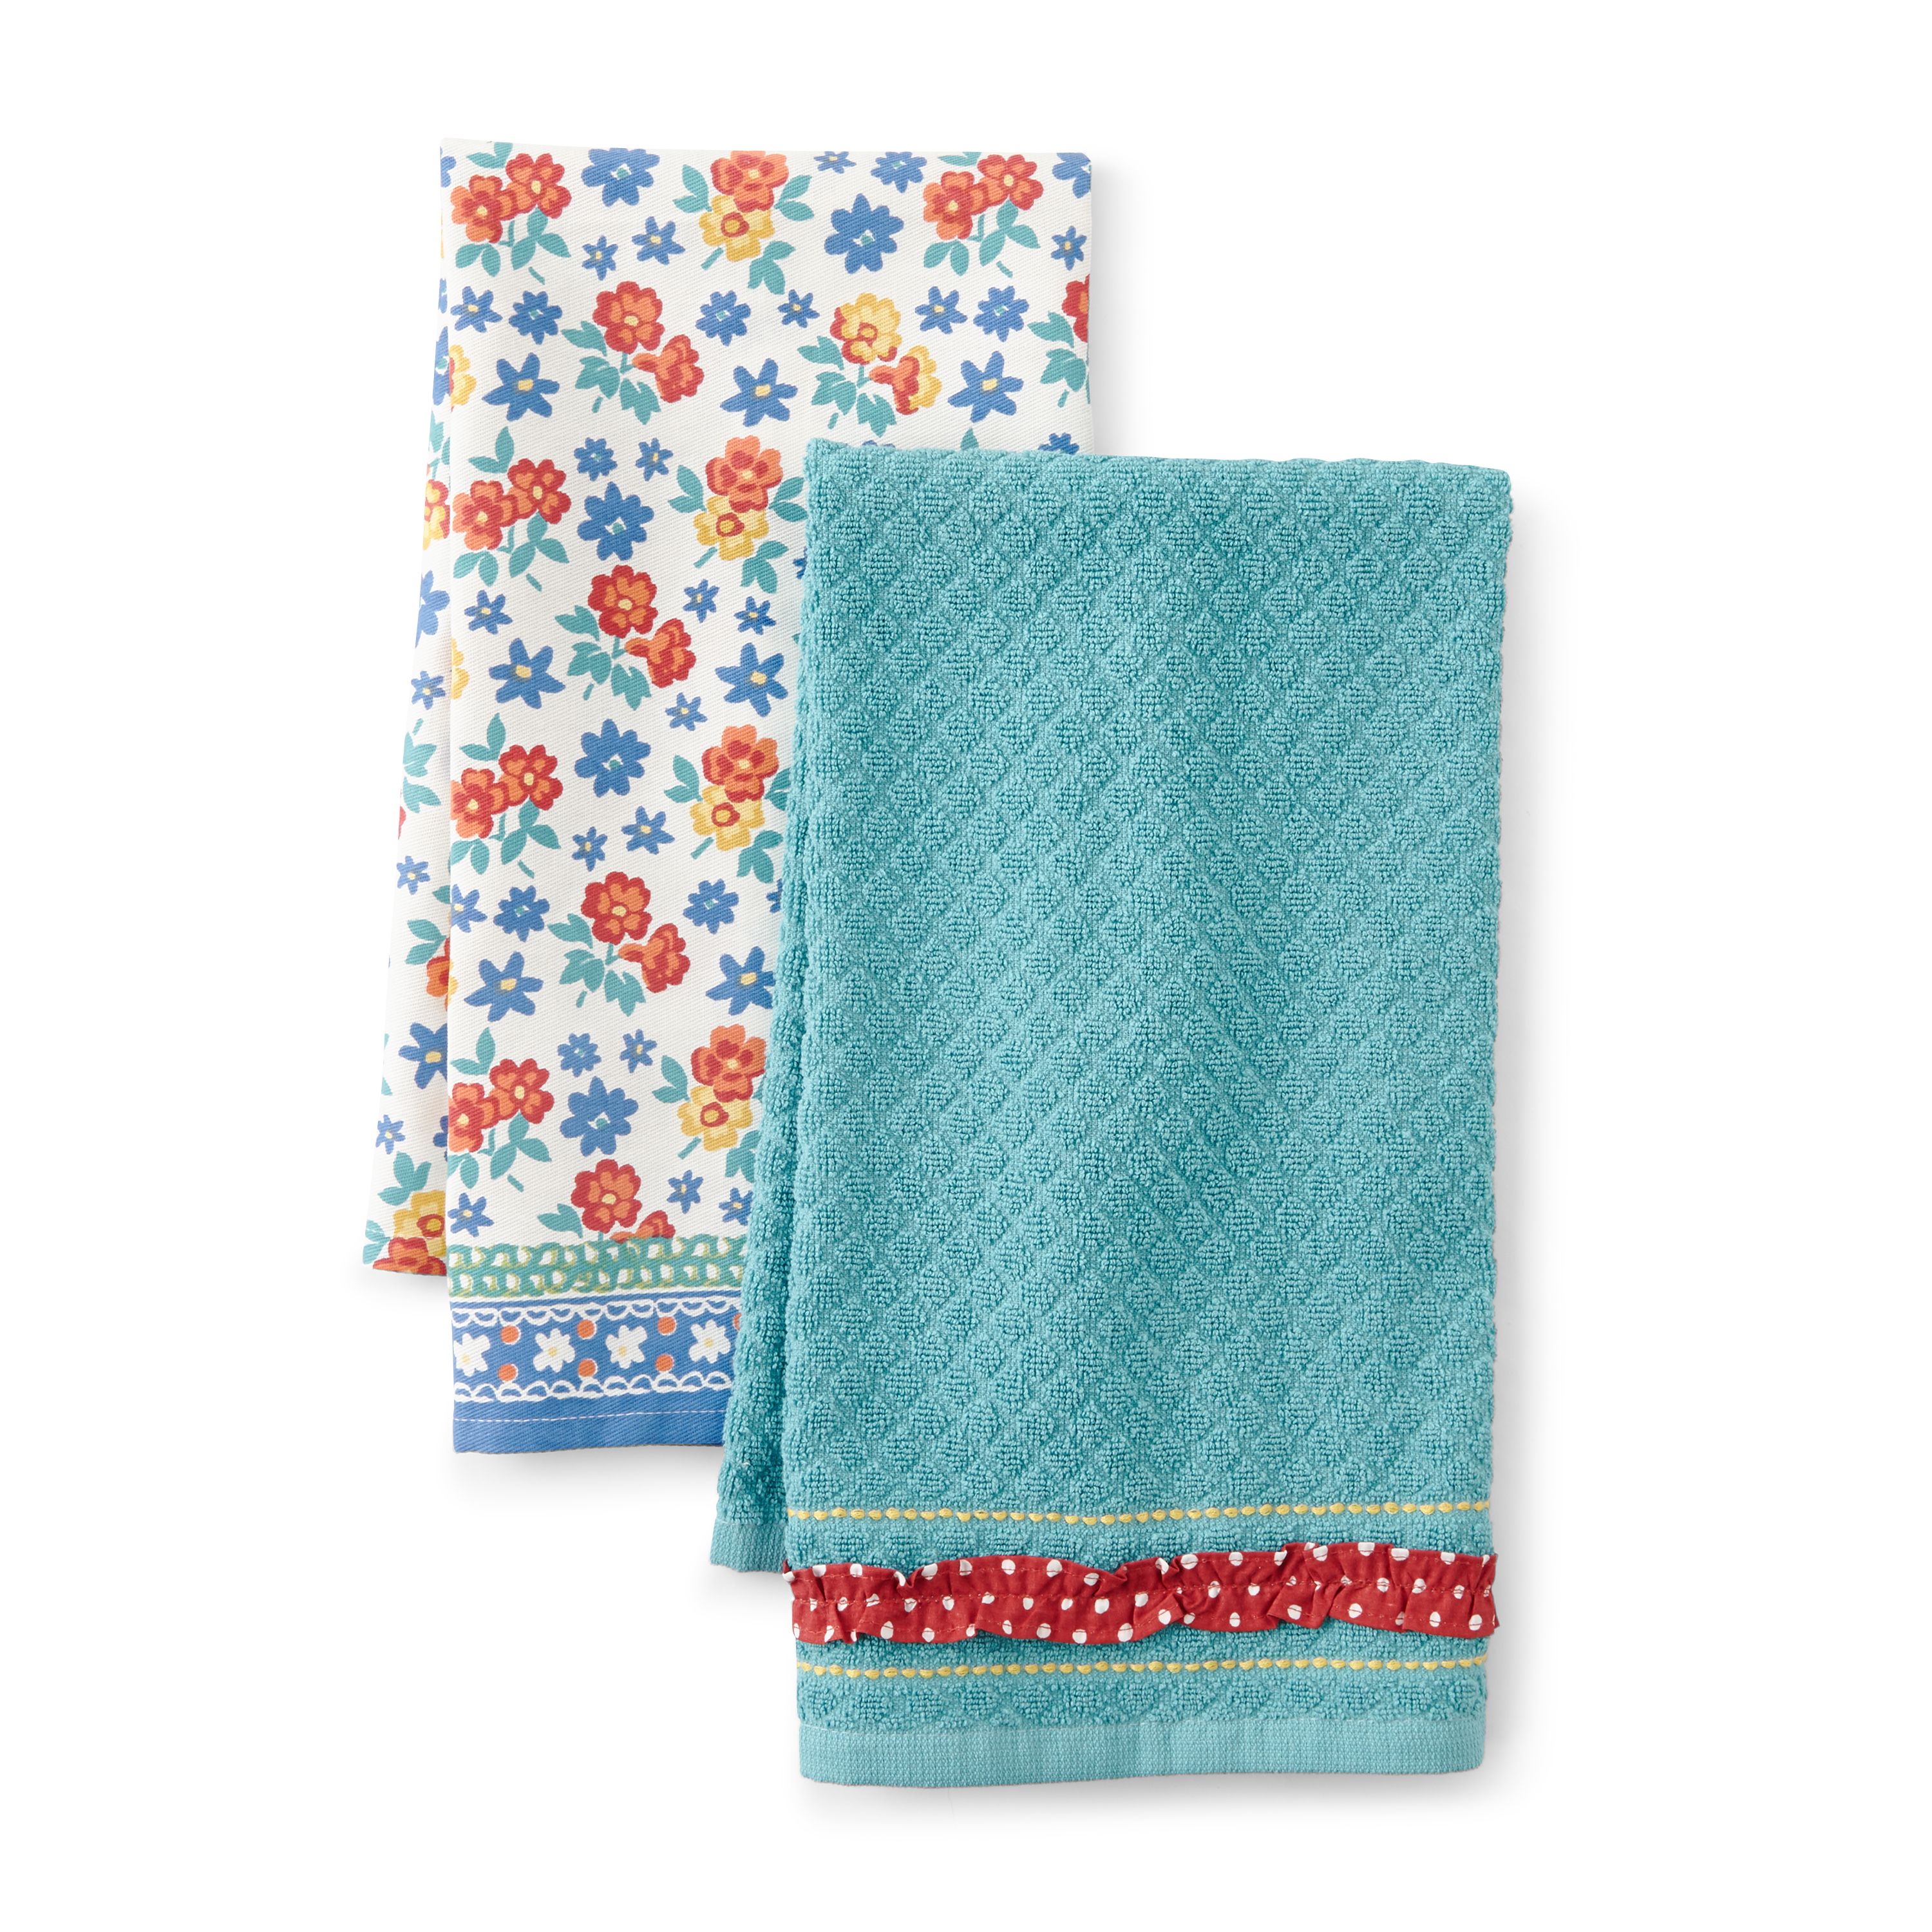 The Pioneer Woman Floral Kitchen Towel Set, Multicolor, 4 Piece - image 4 of 4